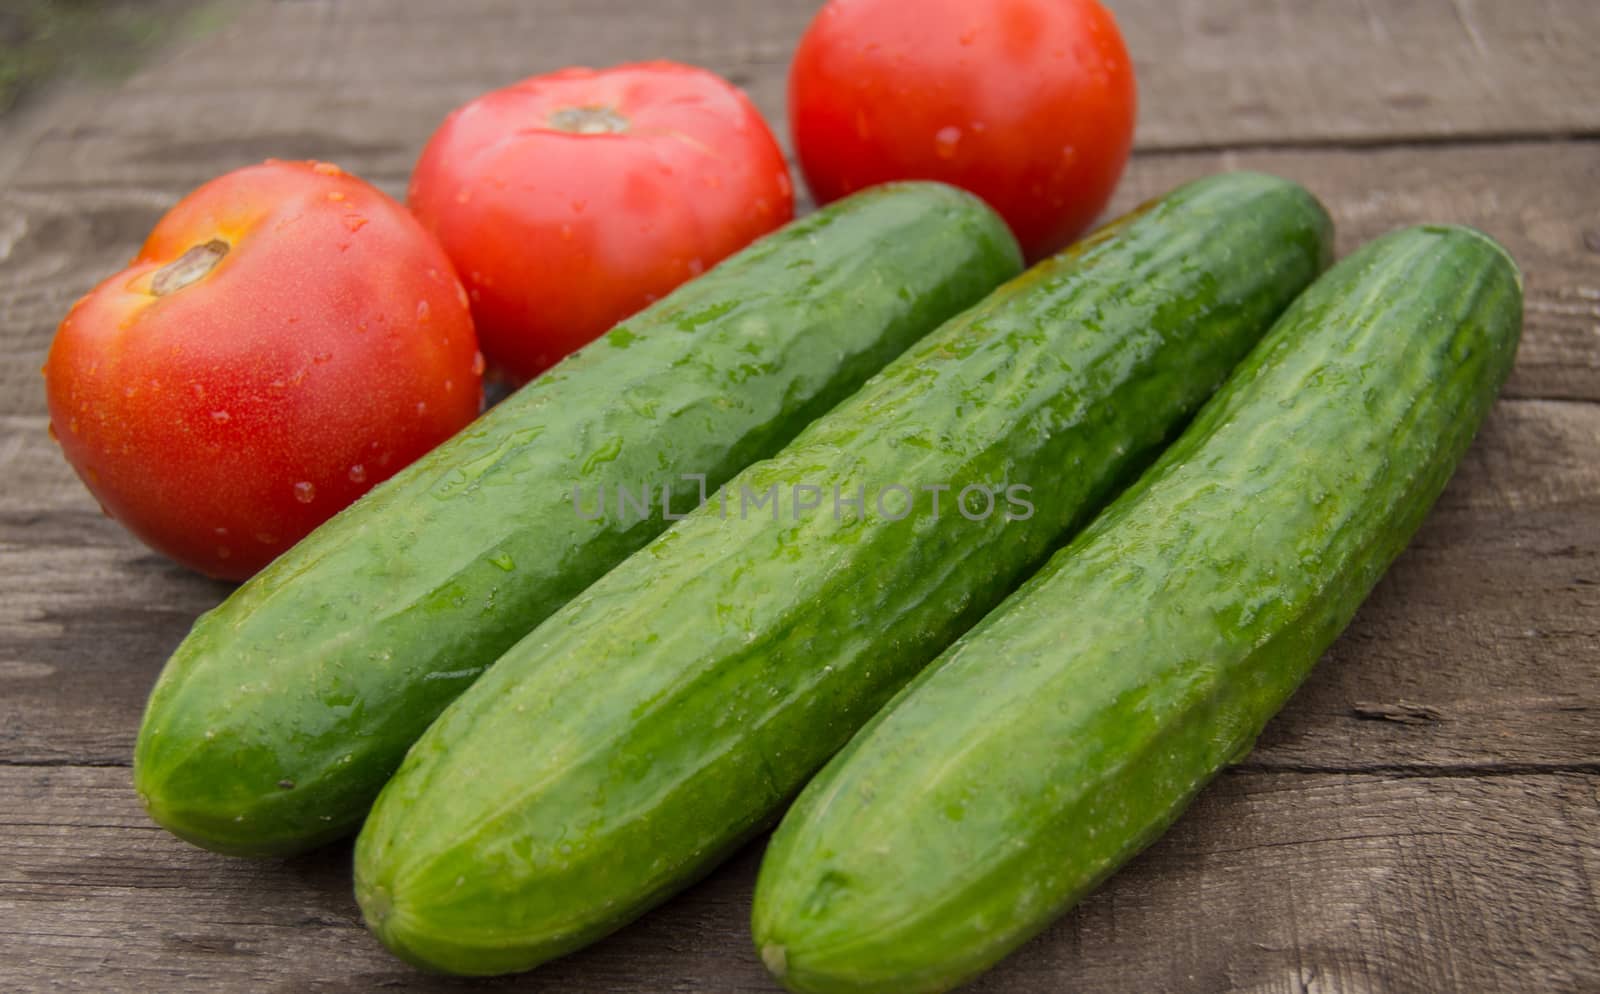 Concept of healthy eating with organic cucumber tomatoes, wooden background by claire_lucia